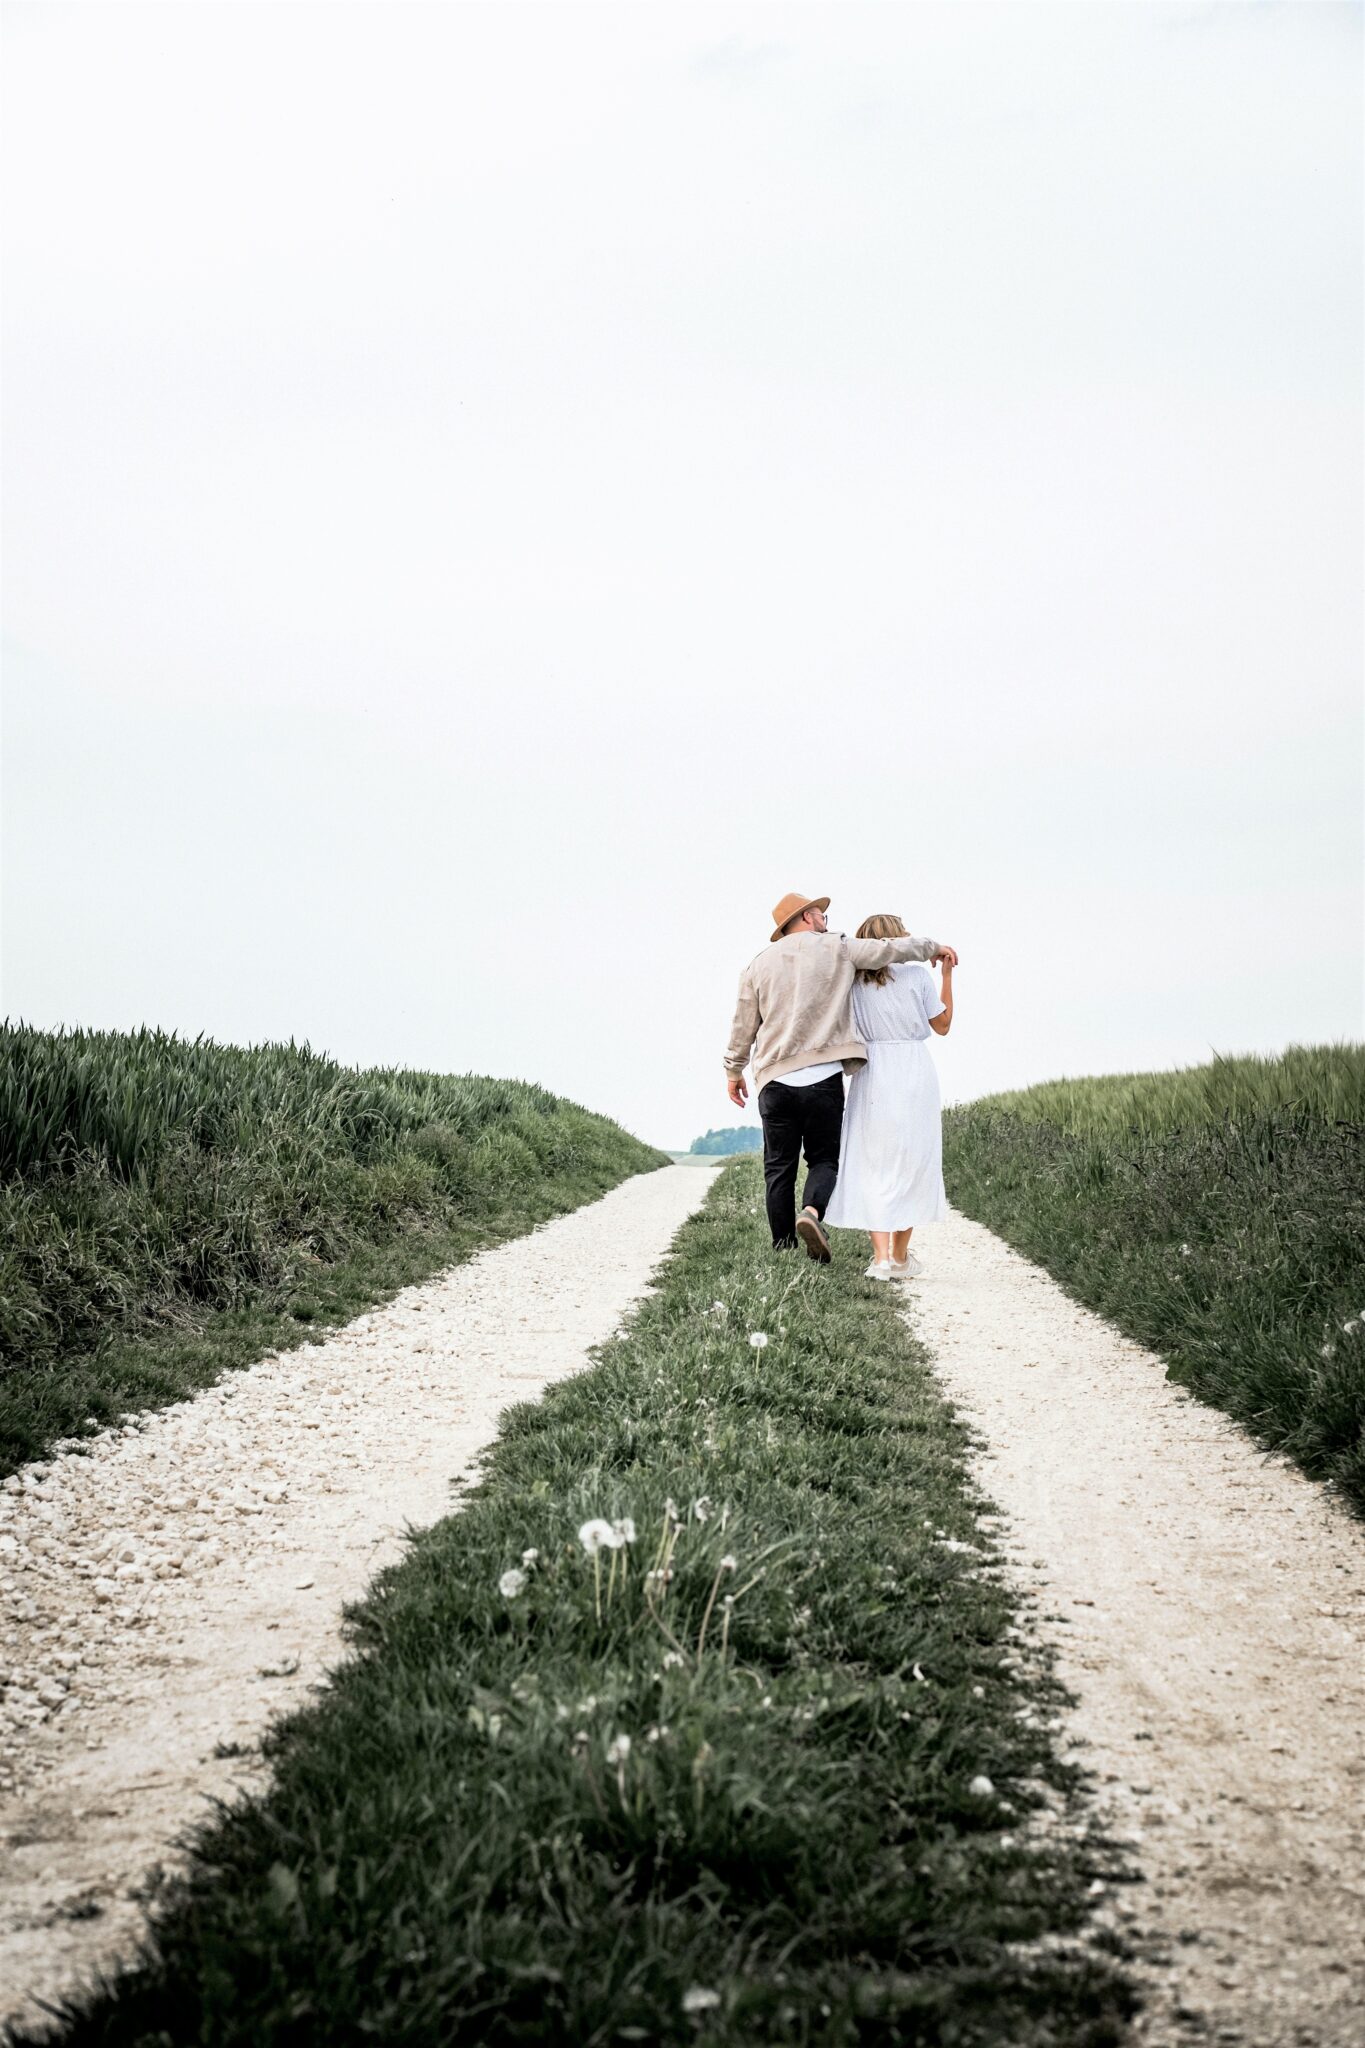 A couple stand together and are walking down a long path. This article covers how to maintain a healthy relationship after divorce.